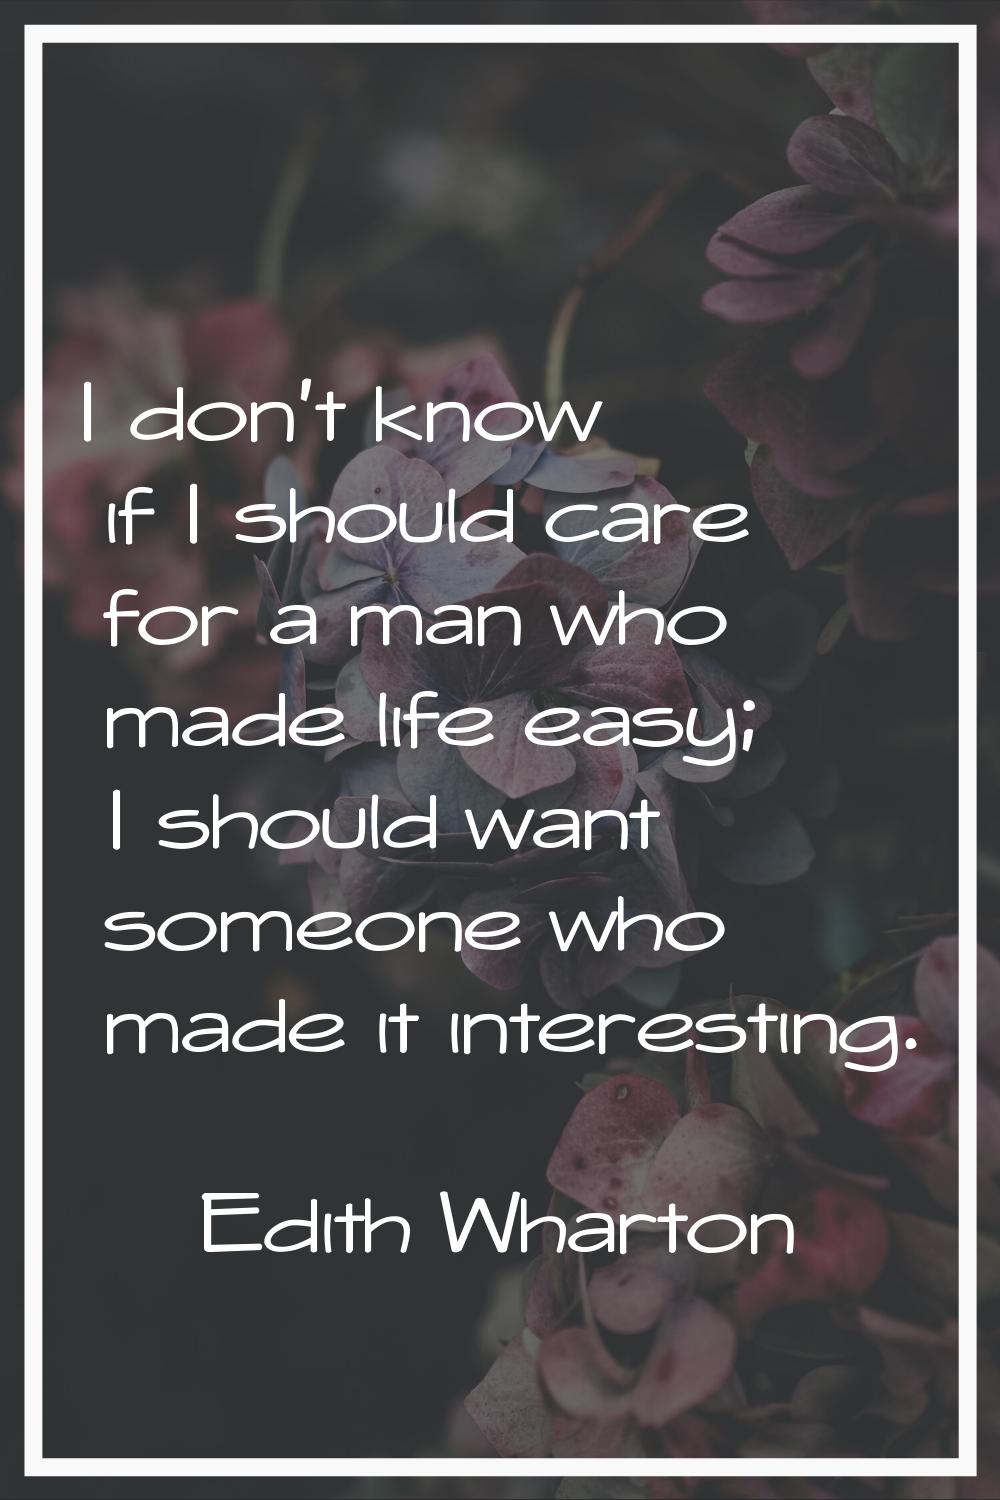 I don't know if I should care for a man who made life easy; I should want someone who made it inter